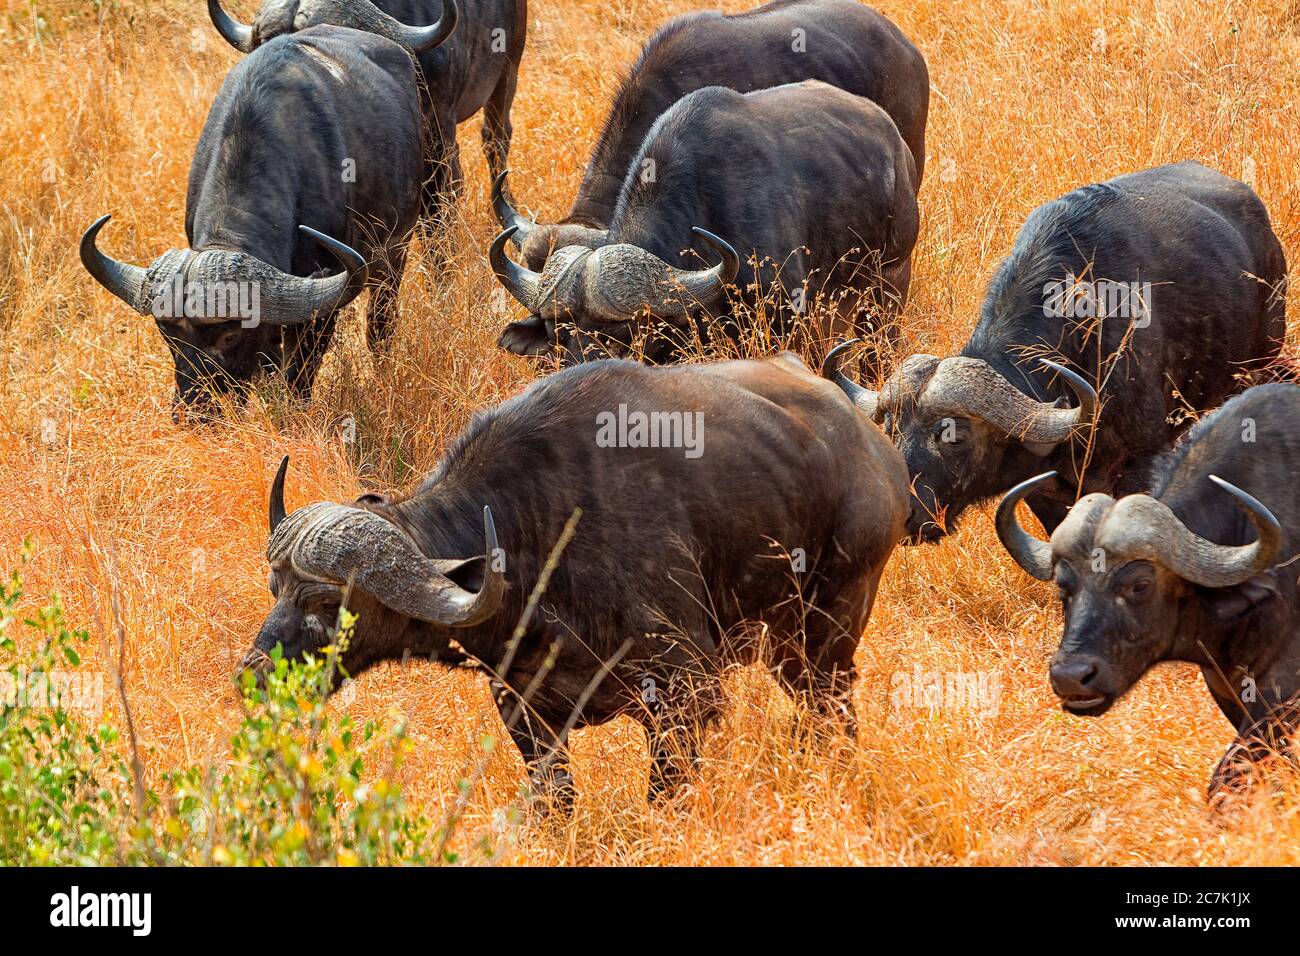 Cape Buffalo in Sabi Sands    A cape buffalo among the tall grass of the bushveld in Sabi Sands Reserve of the Greater Kruger National Park system. Stock Photo